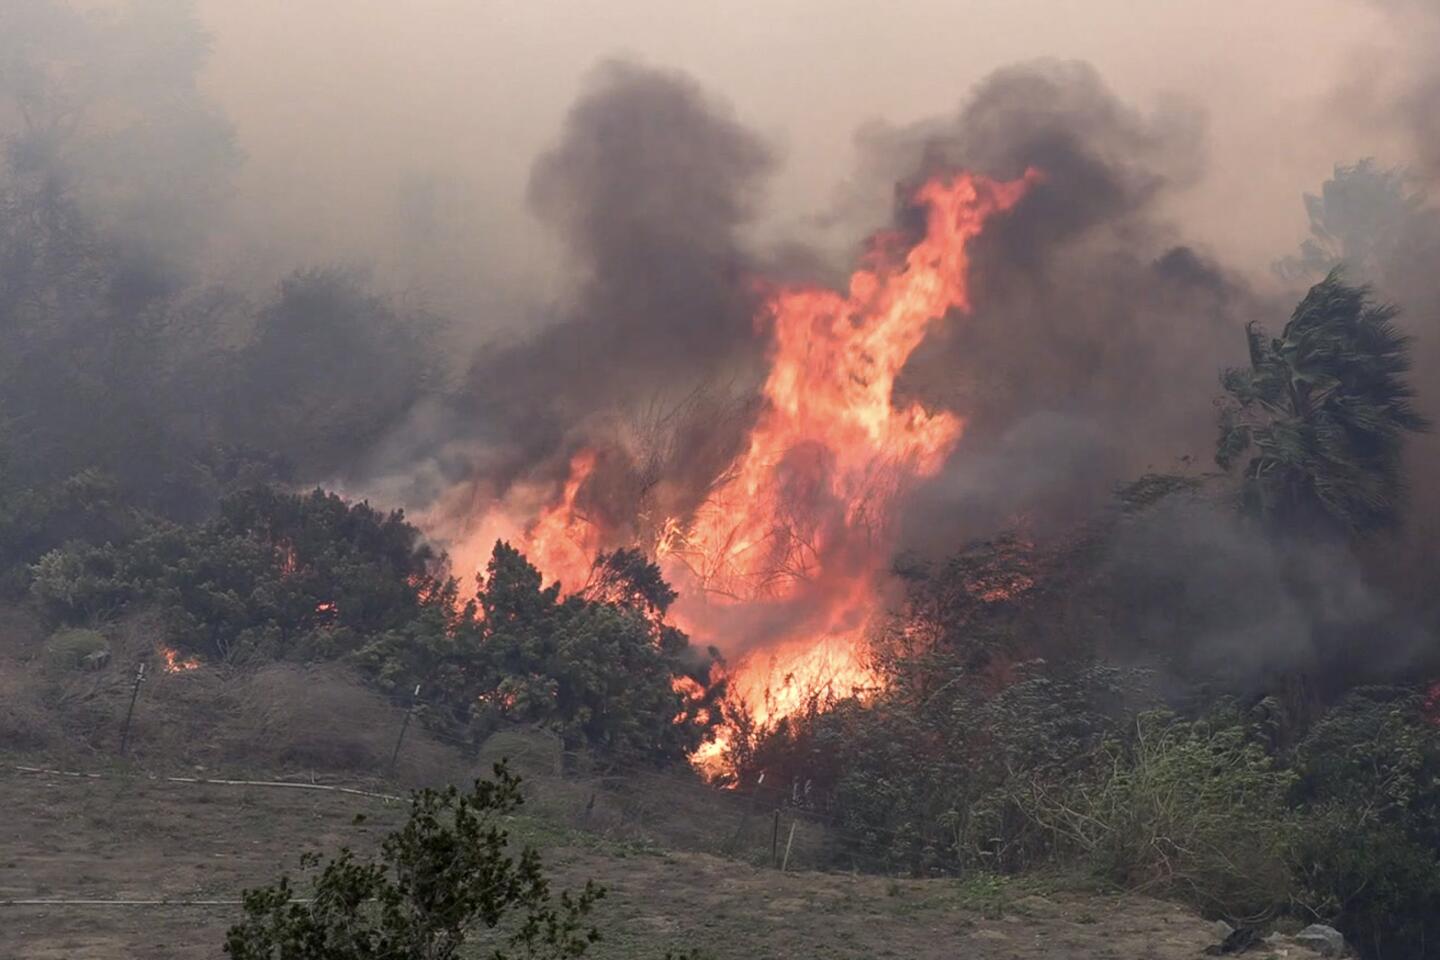 Some Irvine evacuations lifted as fires burn 27,000 acres - Los